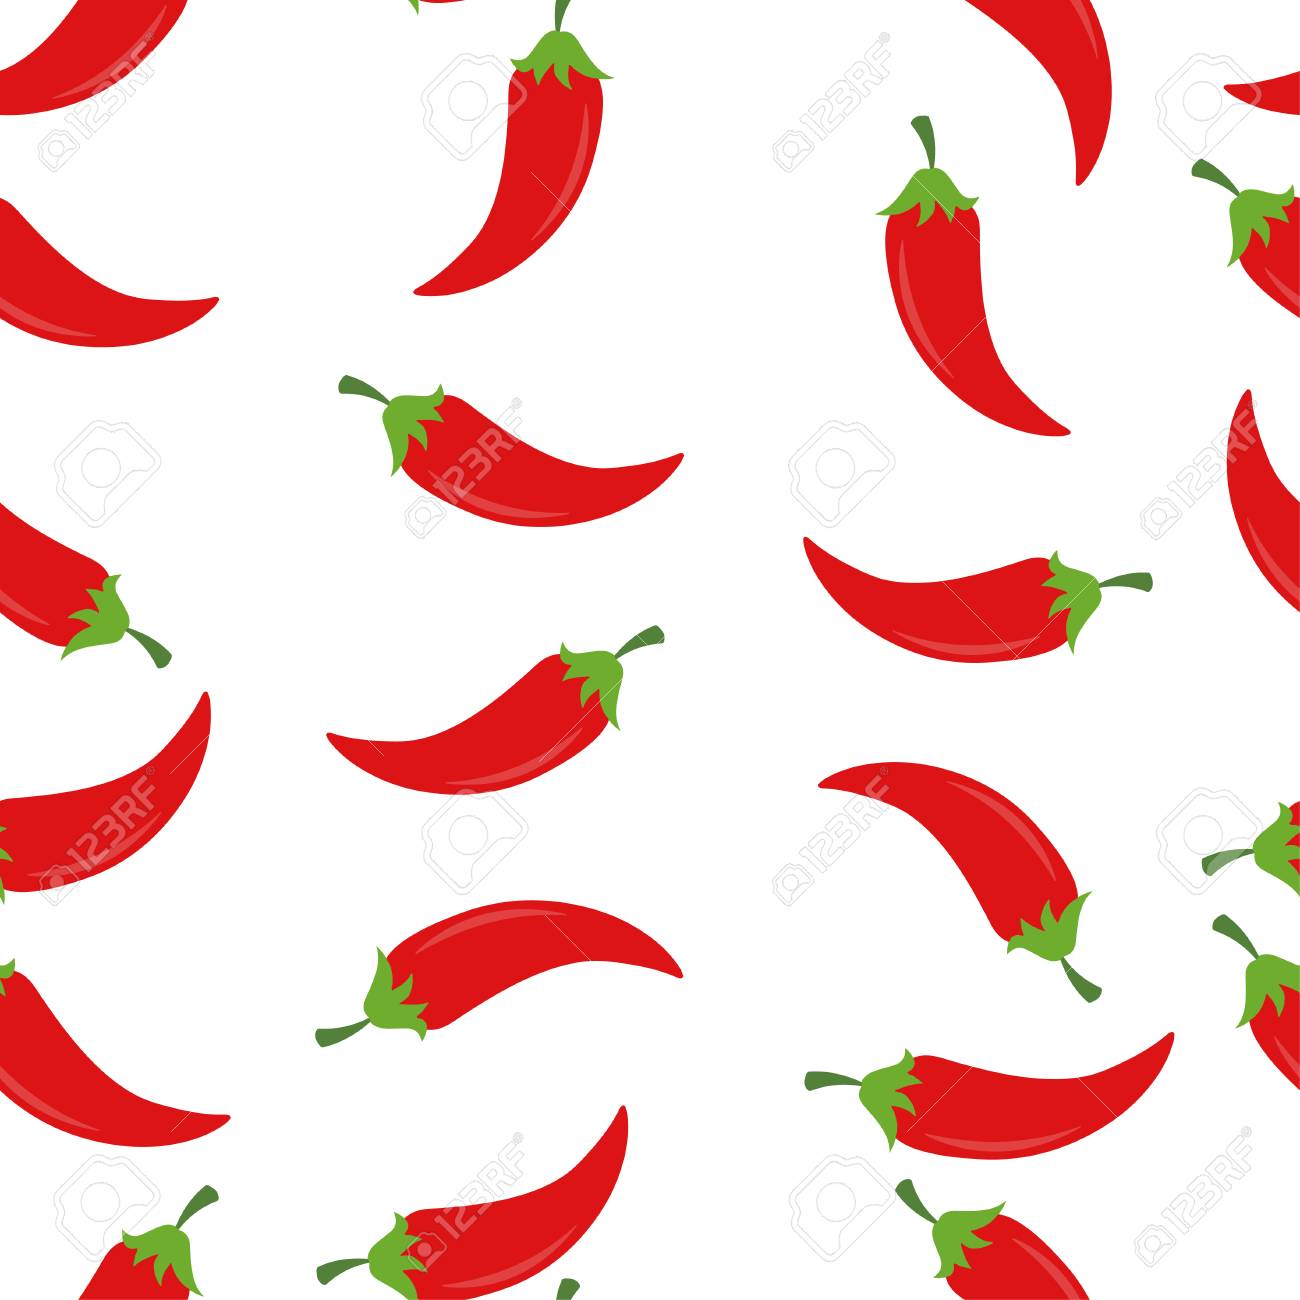 Seamless Pattern Of Red Chili Peppers Illustration Food